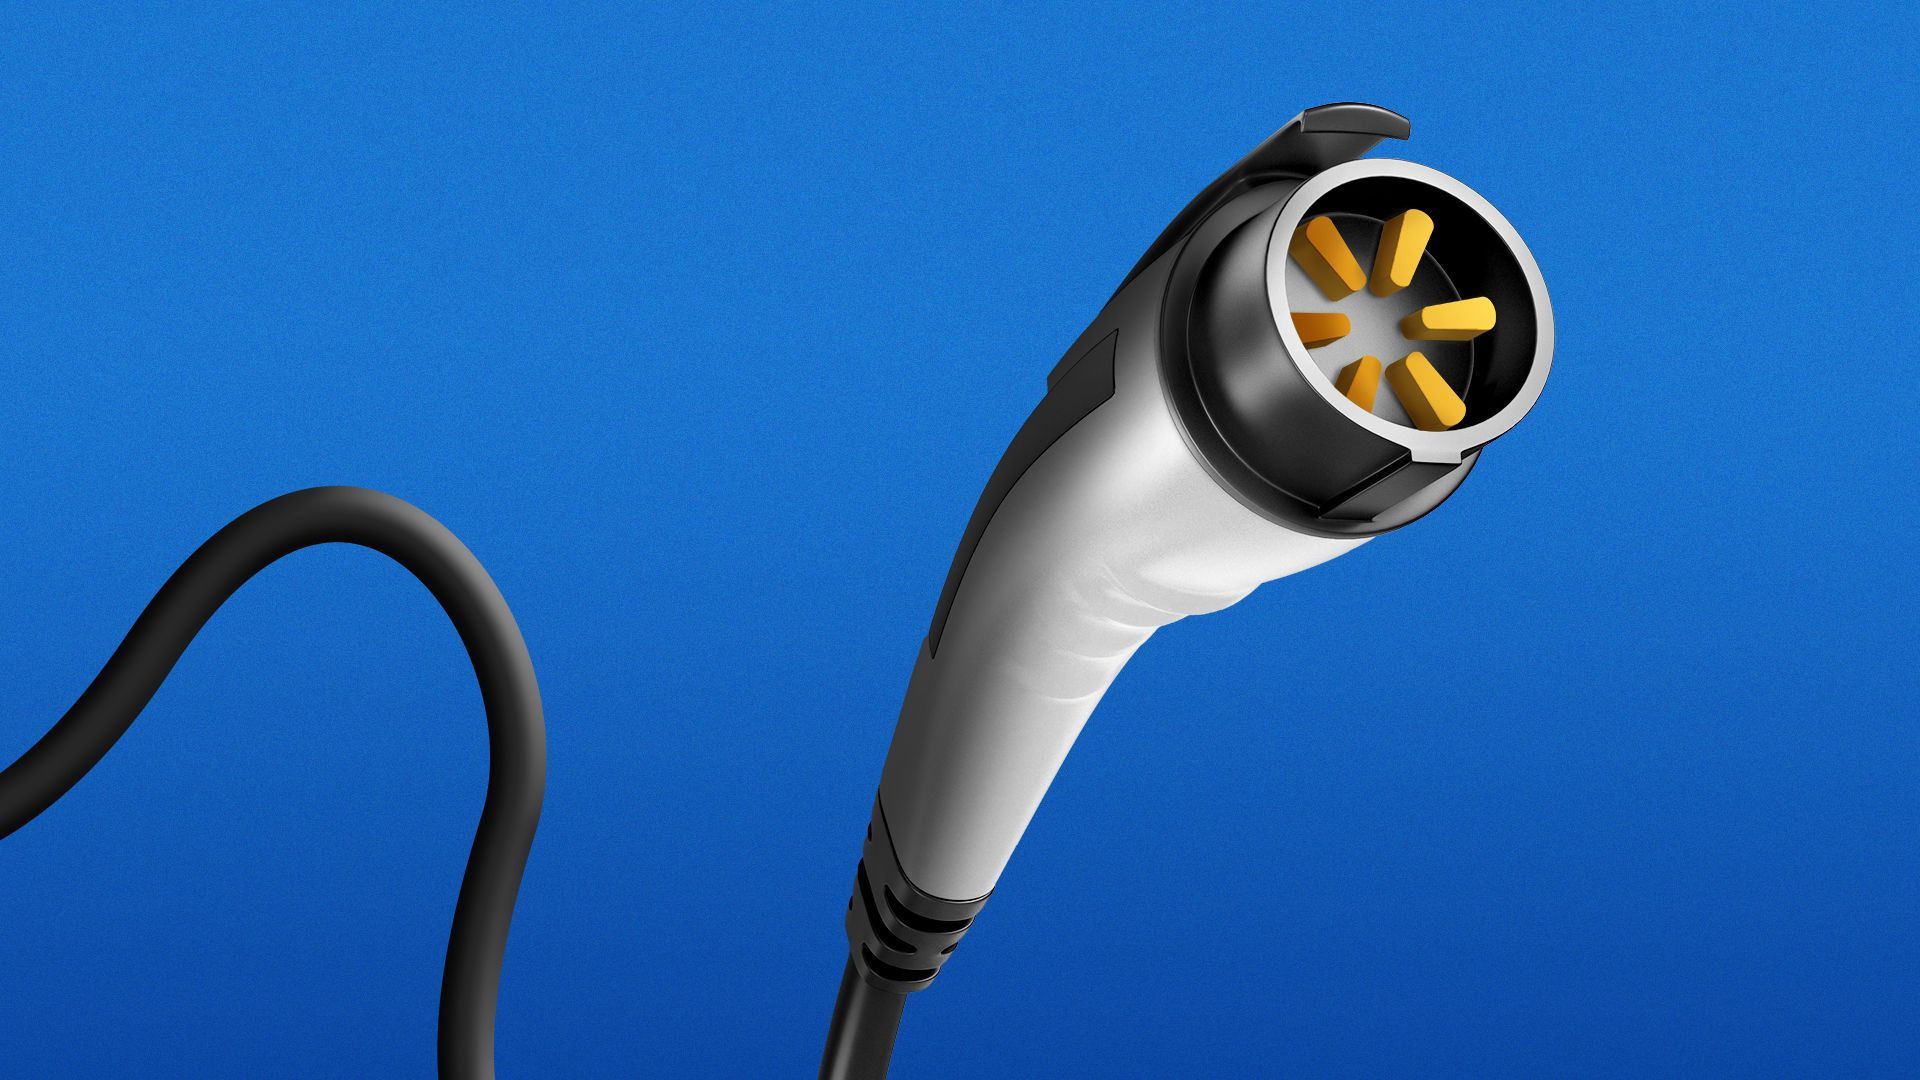 Illustration of an EV charger with the Walmart logo as the plug.